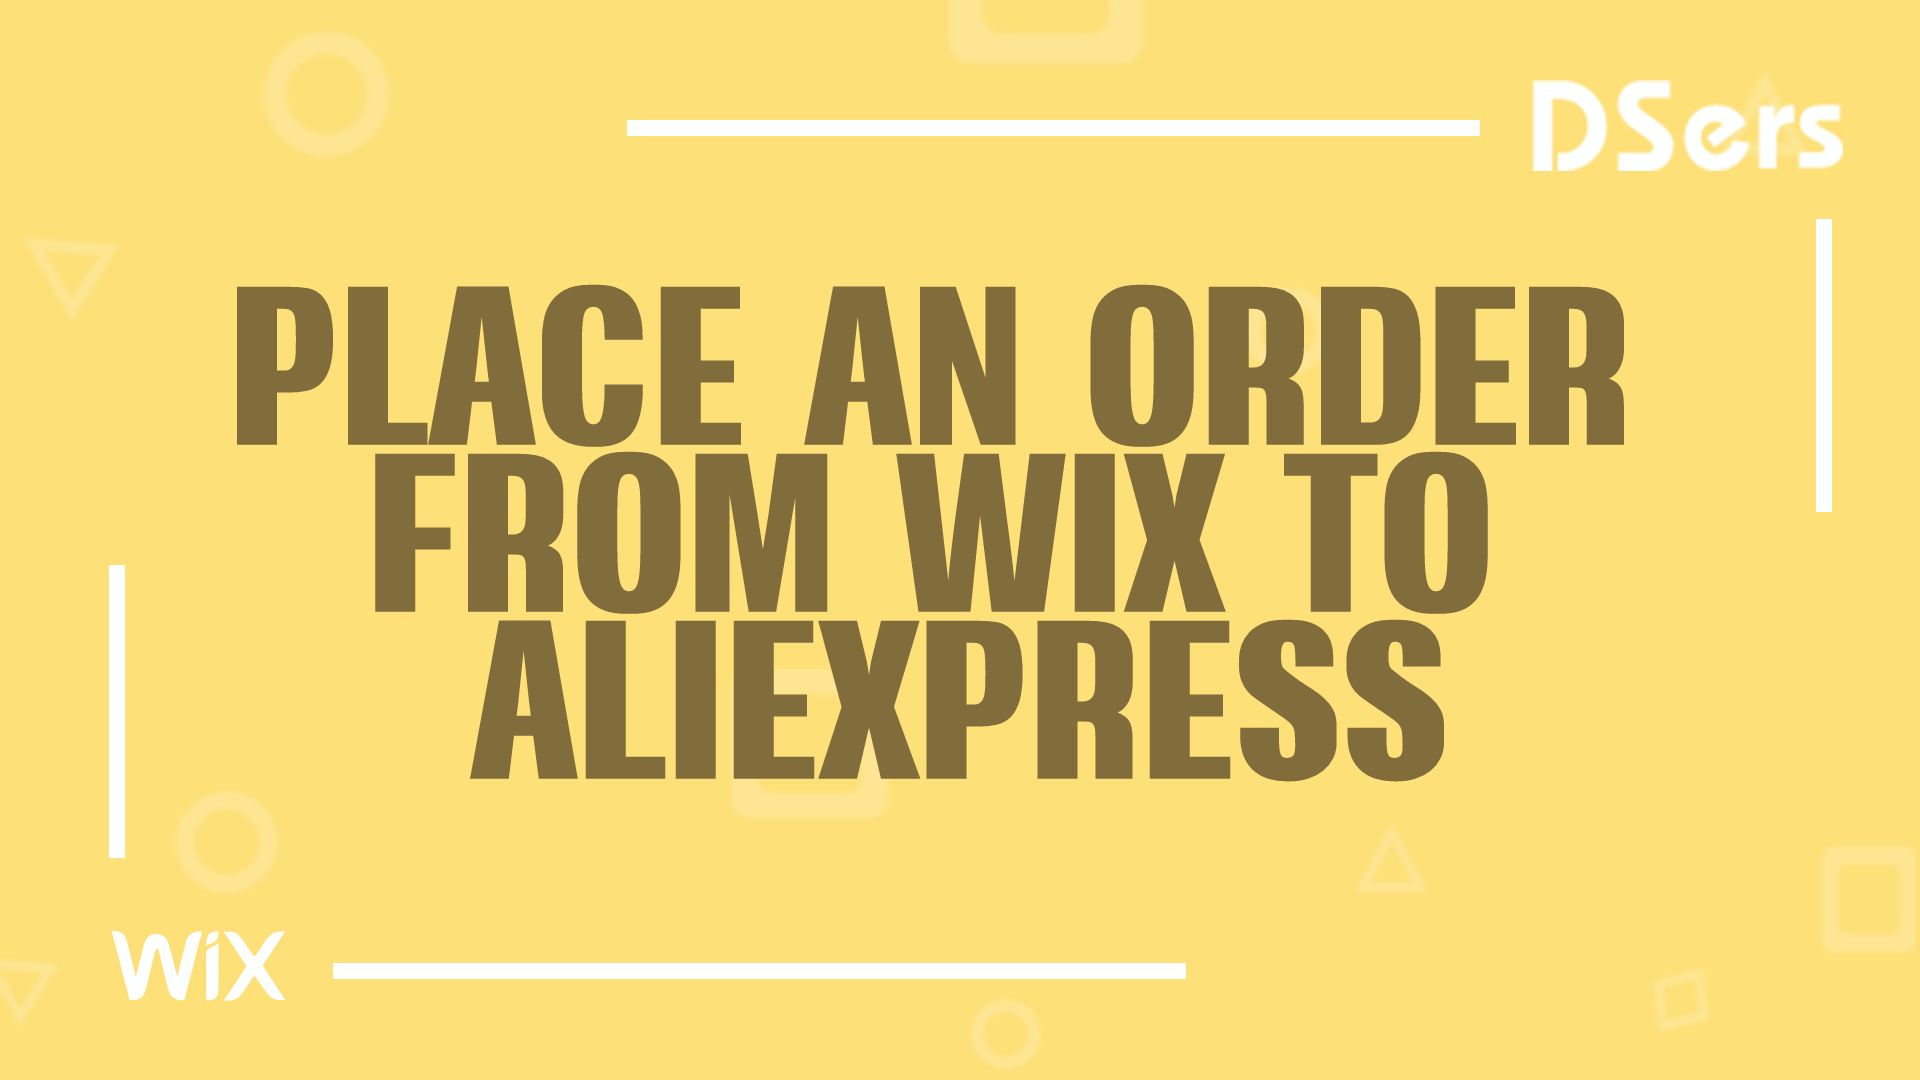 Place an order from Wix to AliExpress